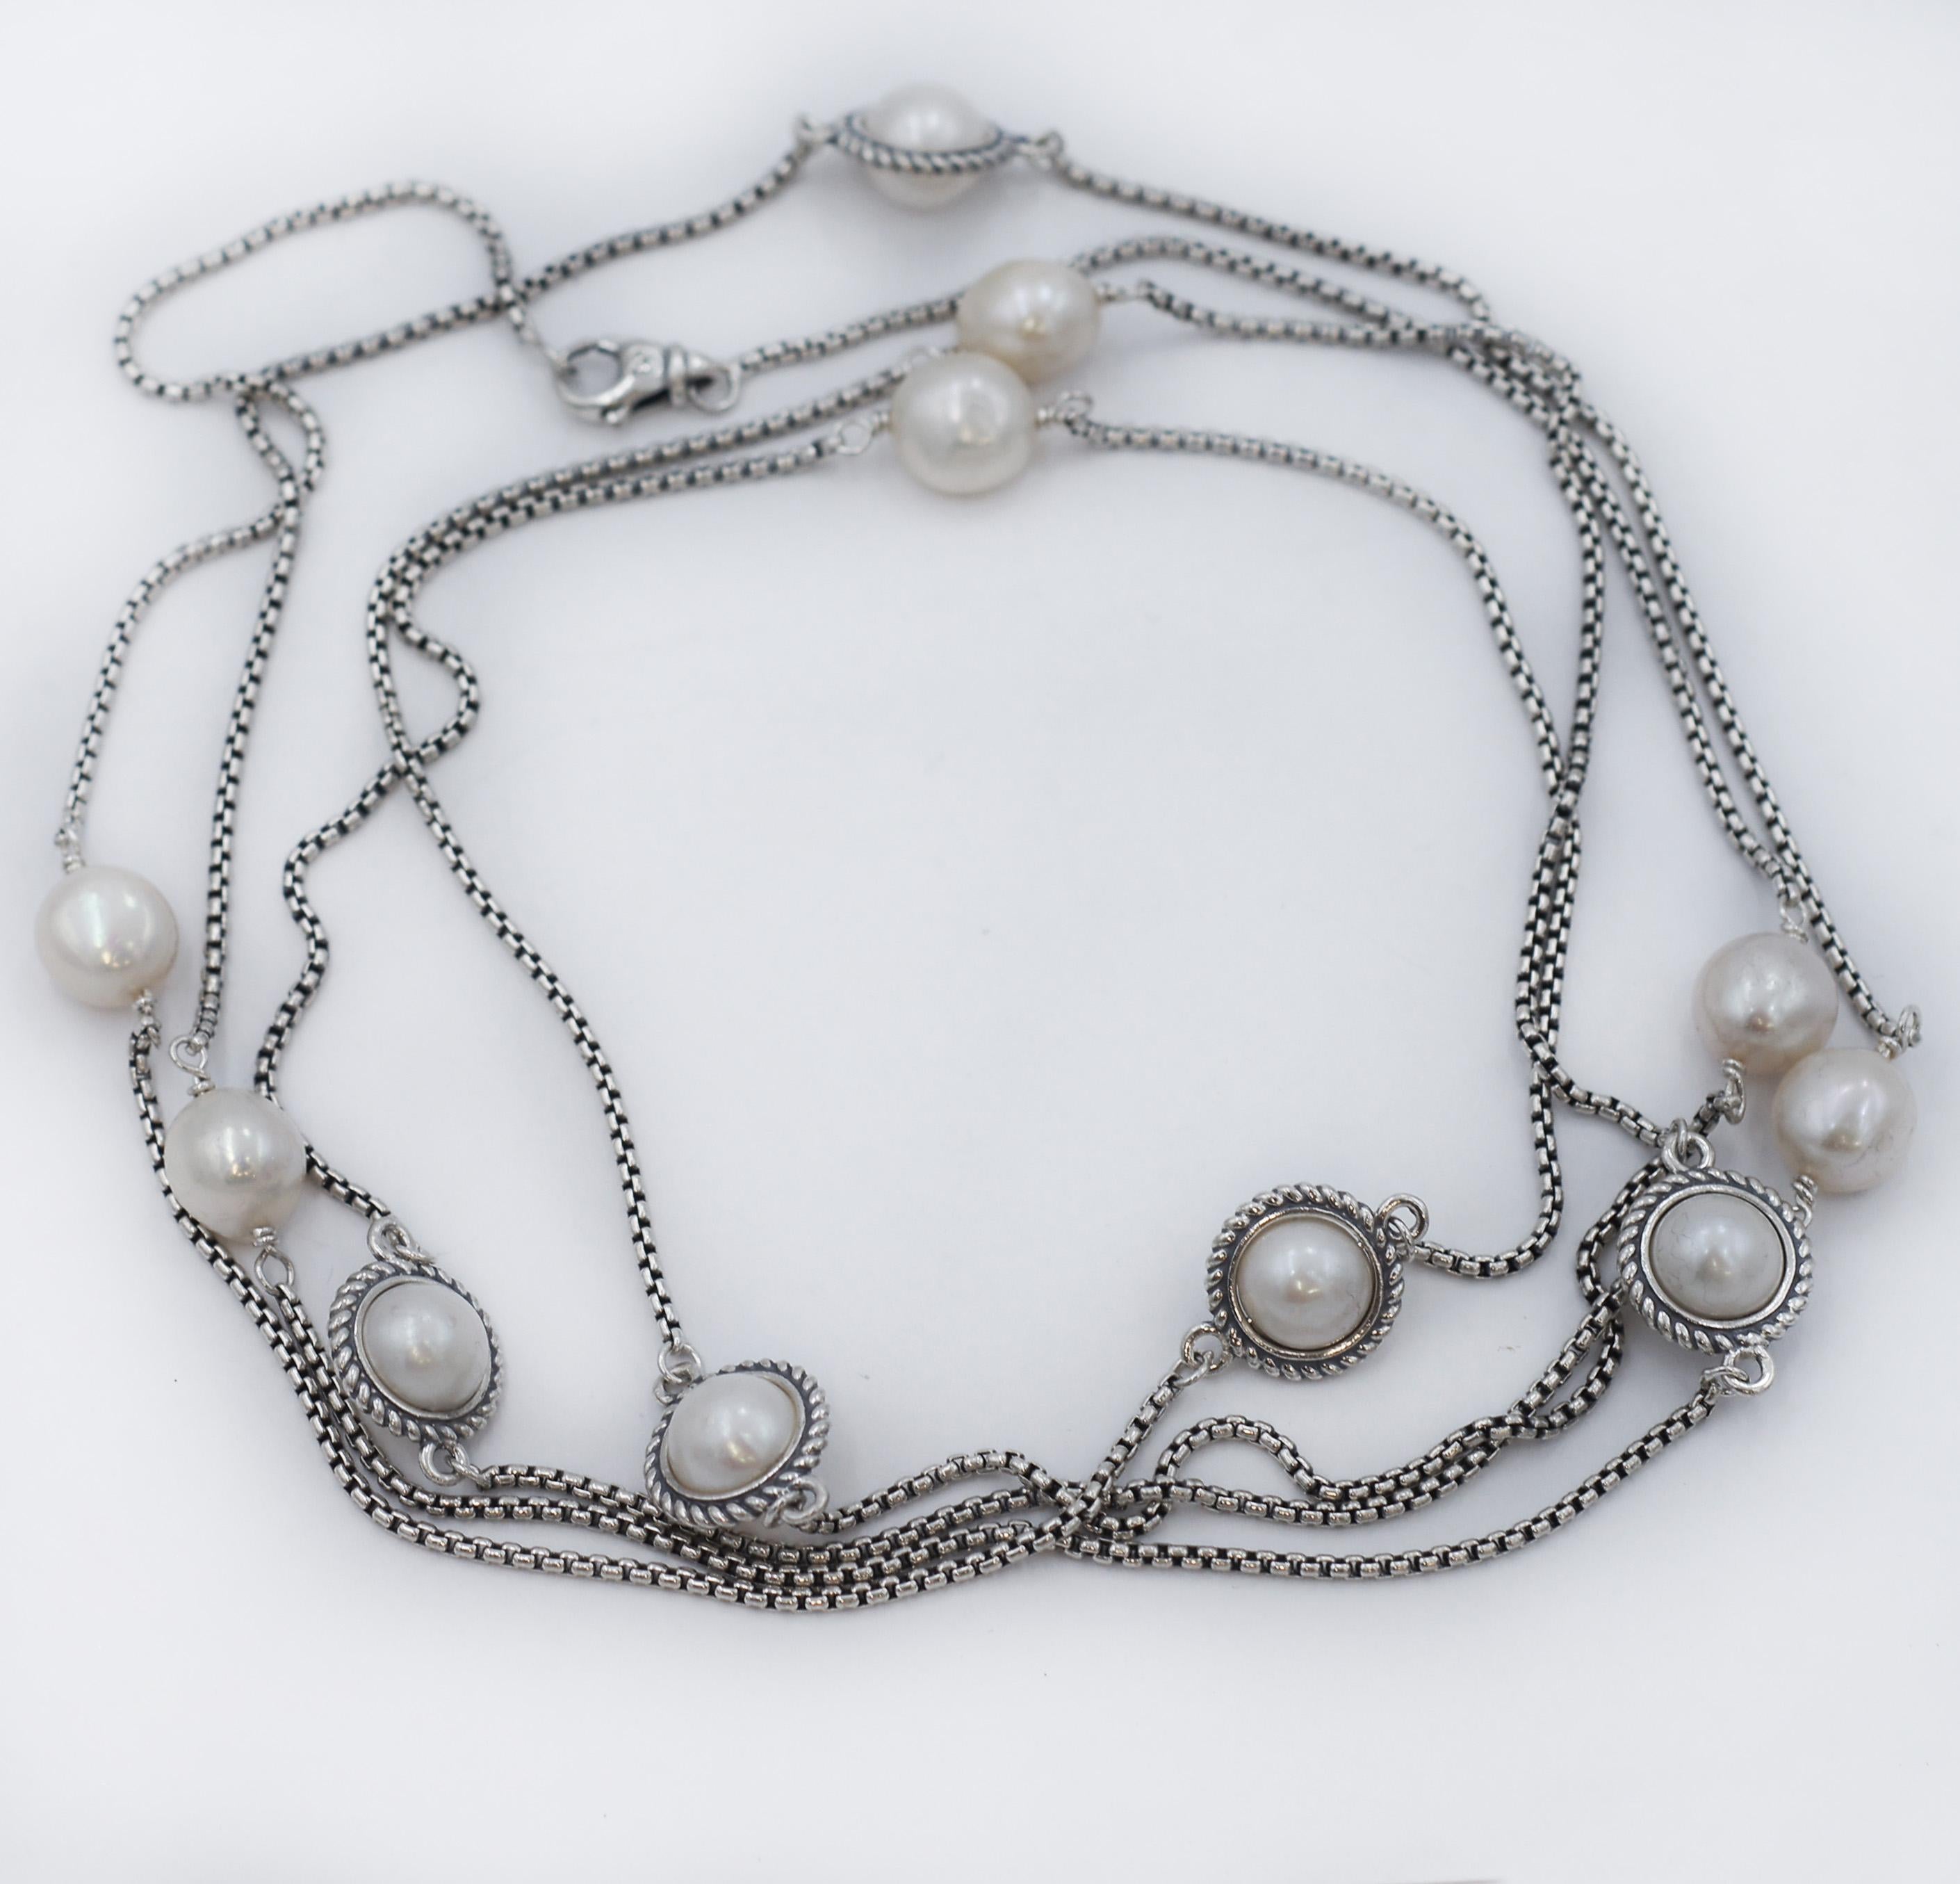 DAVID YURMAN
Pearl Station necklace
Details:
David Yurman
925 Sterling Silver
11 Pearls spaced neatly throughout this long Necklace
Bezel Cable Design around 5 of the pearls
58” Long chain
Chain is a 1.75mm puffed box chain
David Yurman chains are